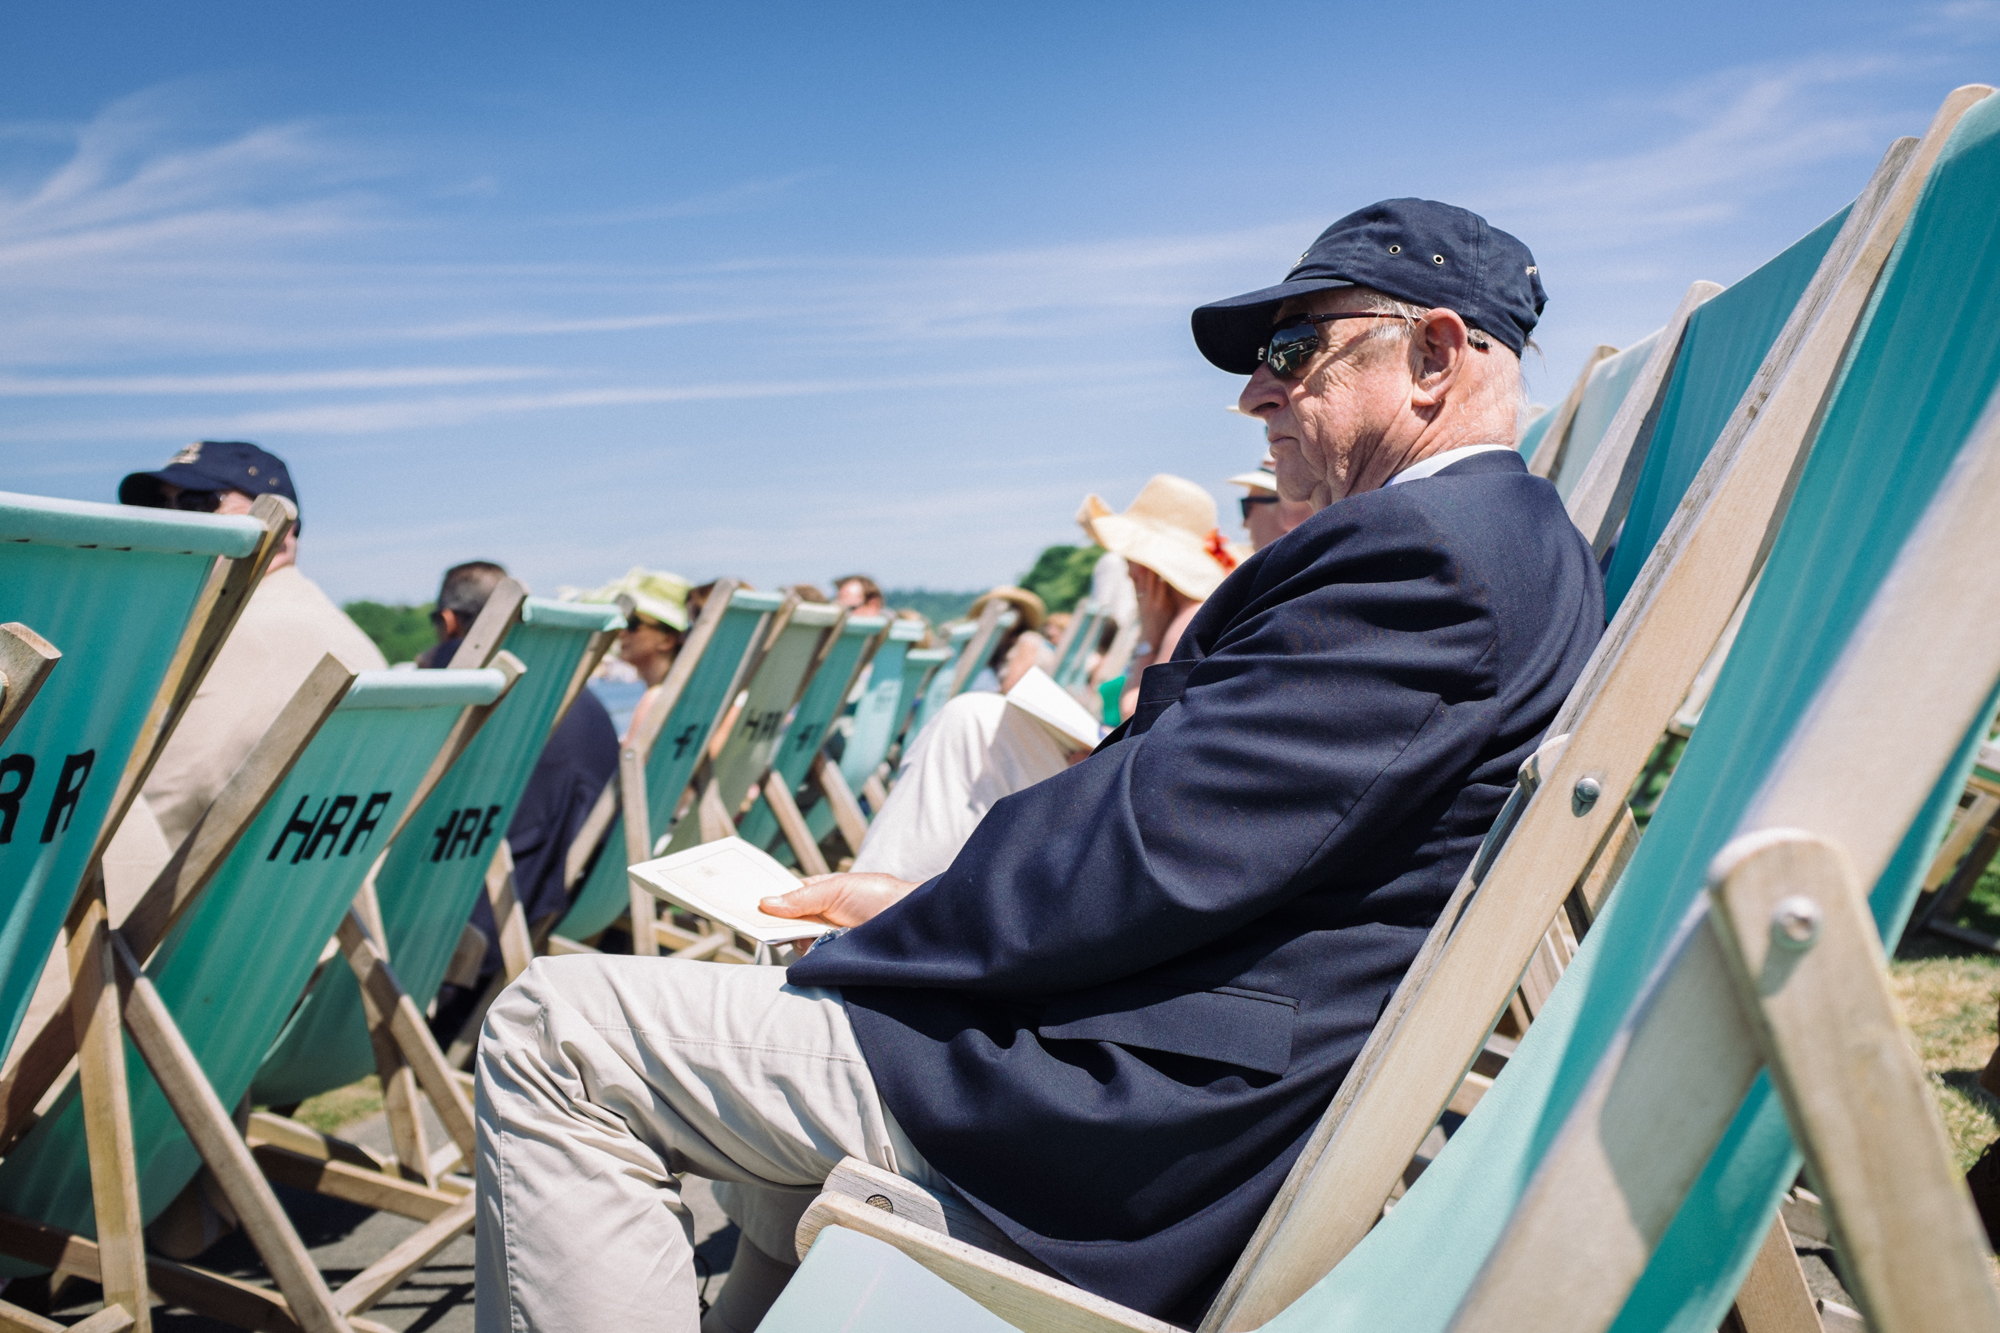  A spectator relaxes in the heat of the midday sunshine in the Steward's Enclosure at Henley Royal Regatta. Men are not allowed to take off their jackets, despite the temperature, unless a special announcement is made by officials. 